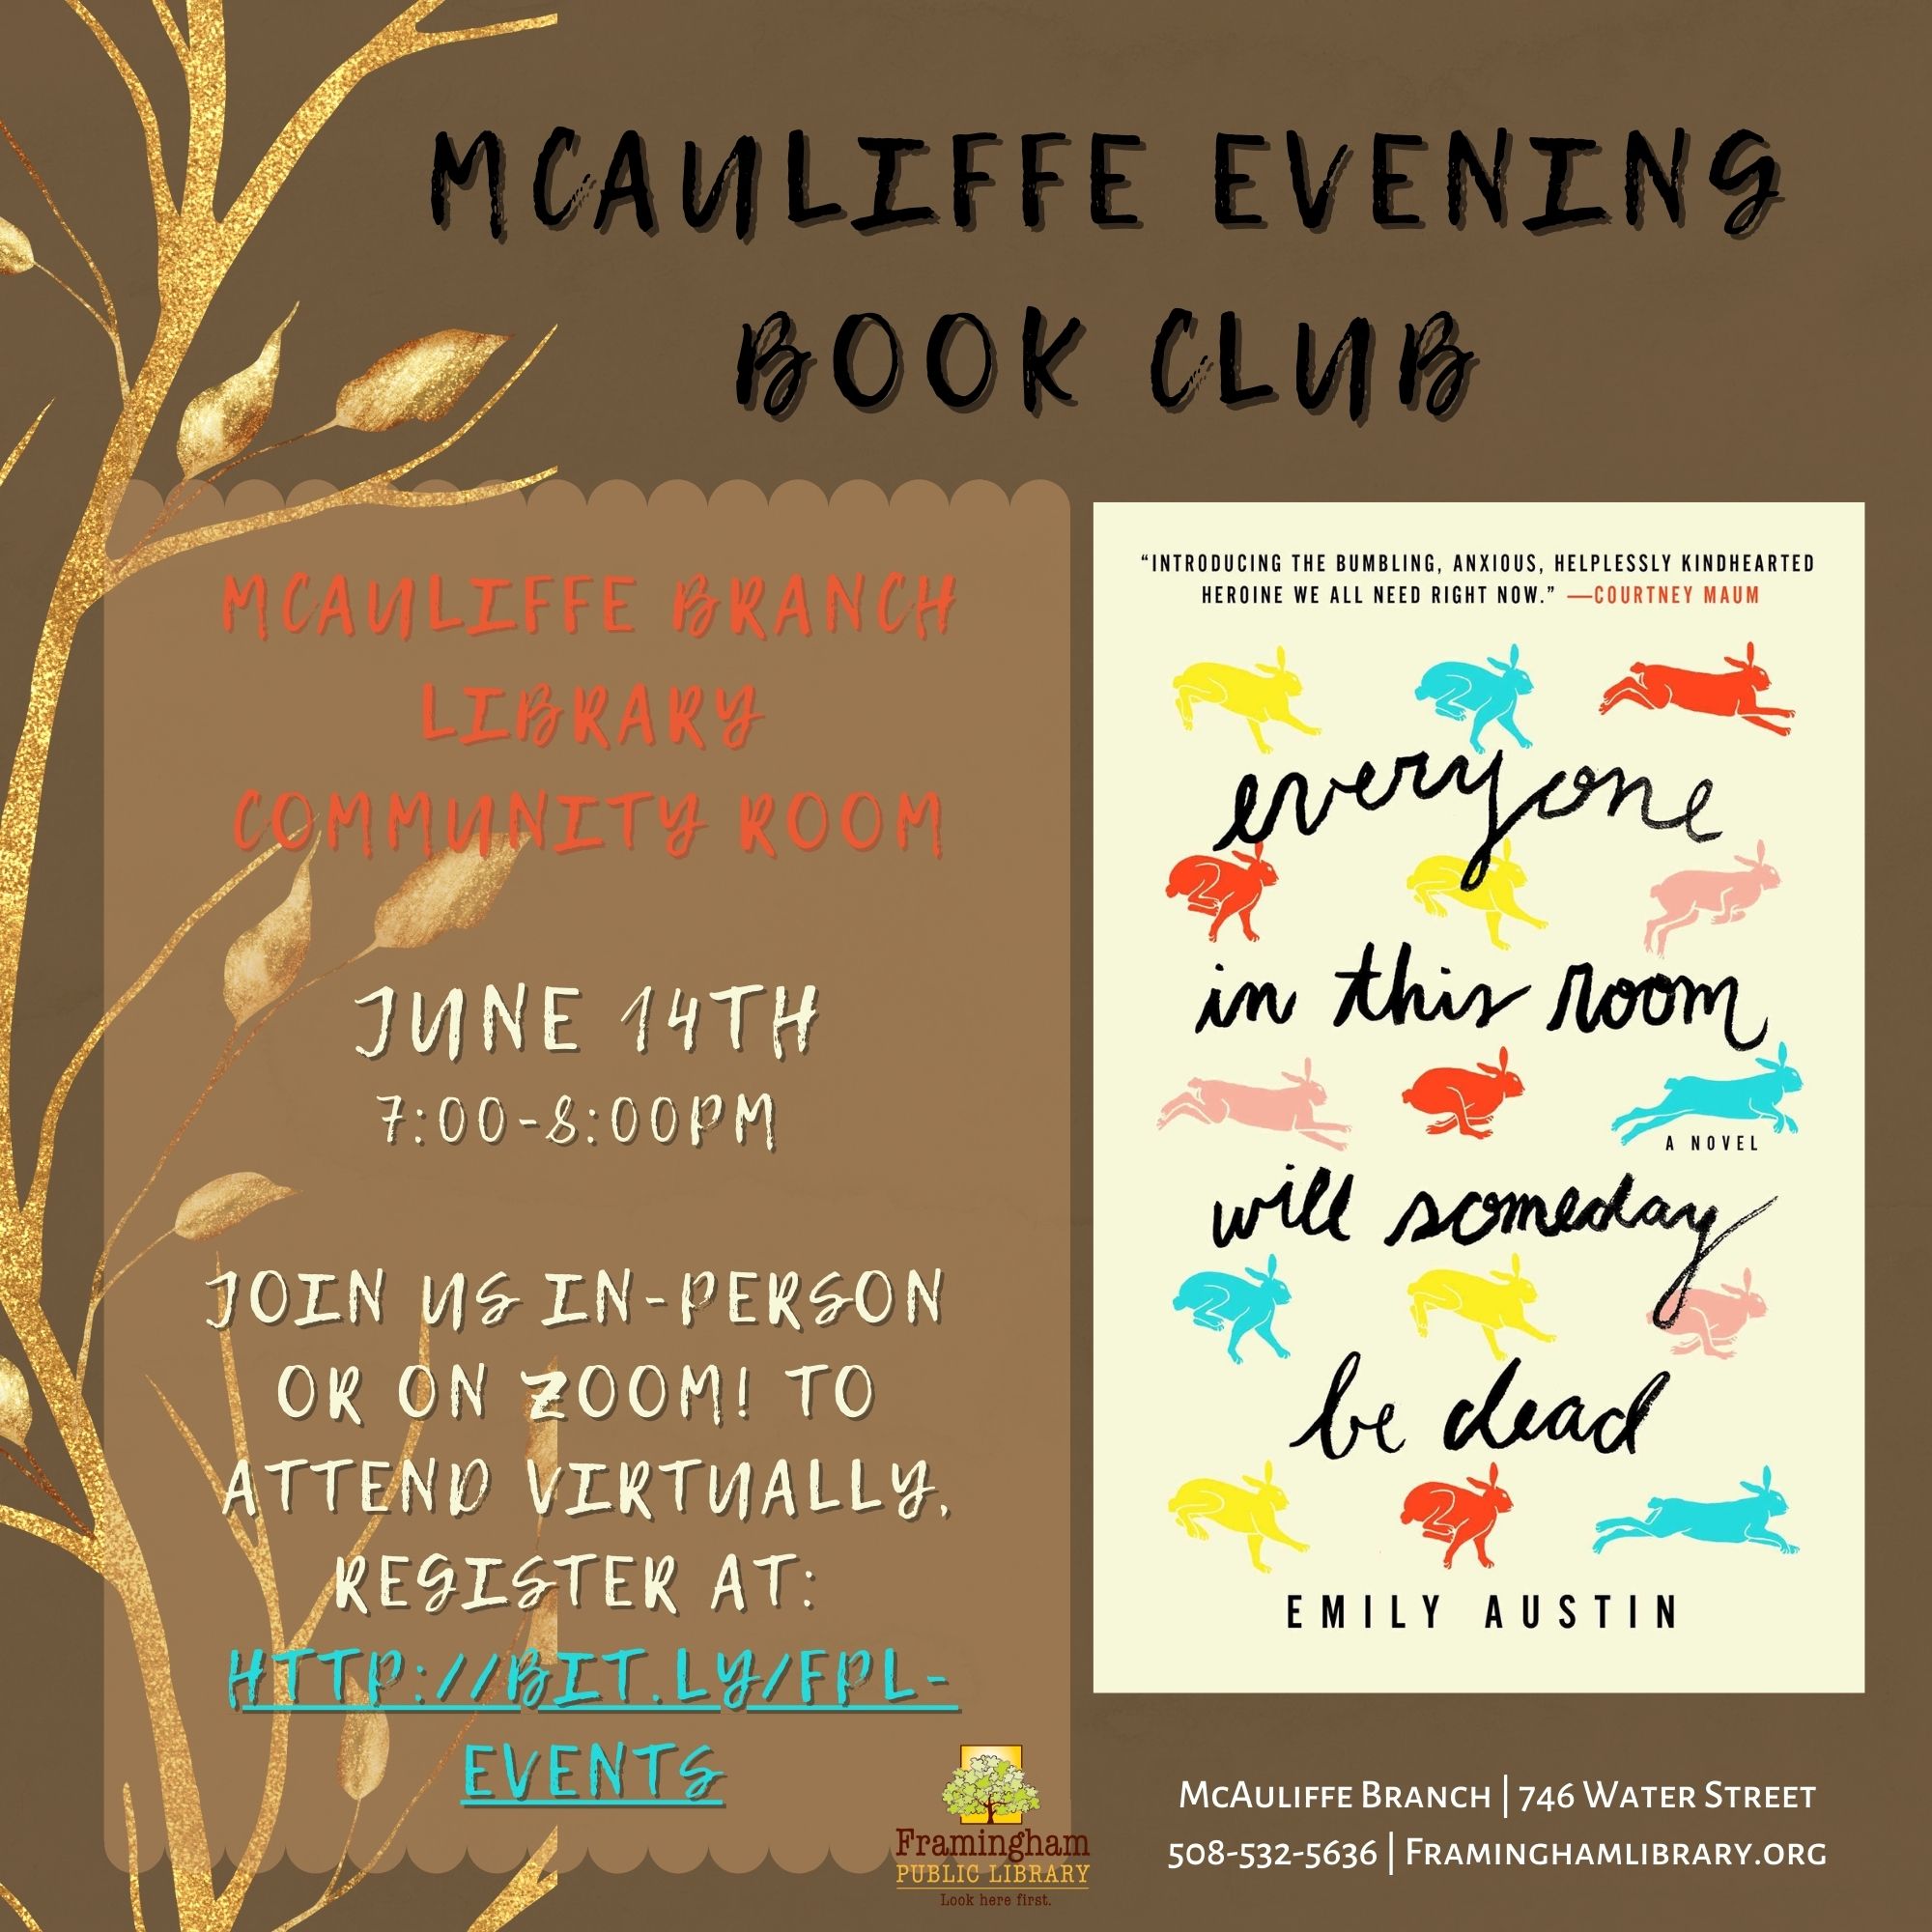 McAuliffe Evening Book Club: Everyone in This Room Will Someday Be Dead by Emily R. Austin thumbnail Photo